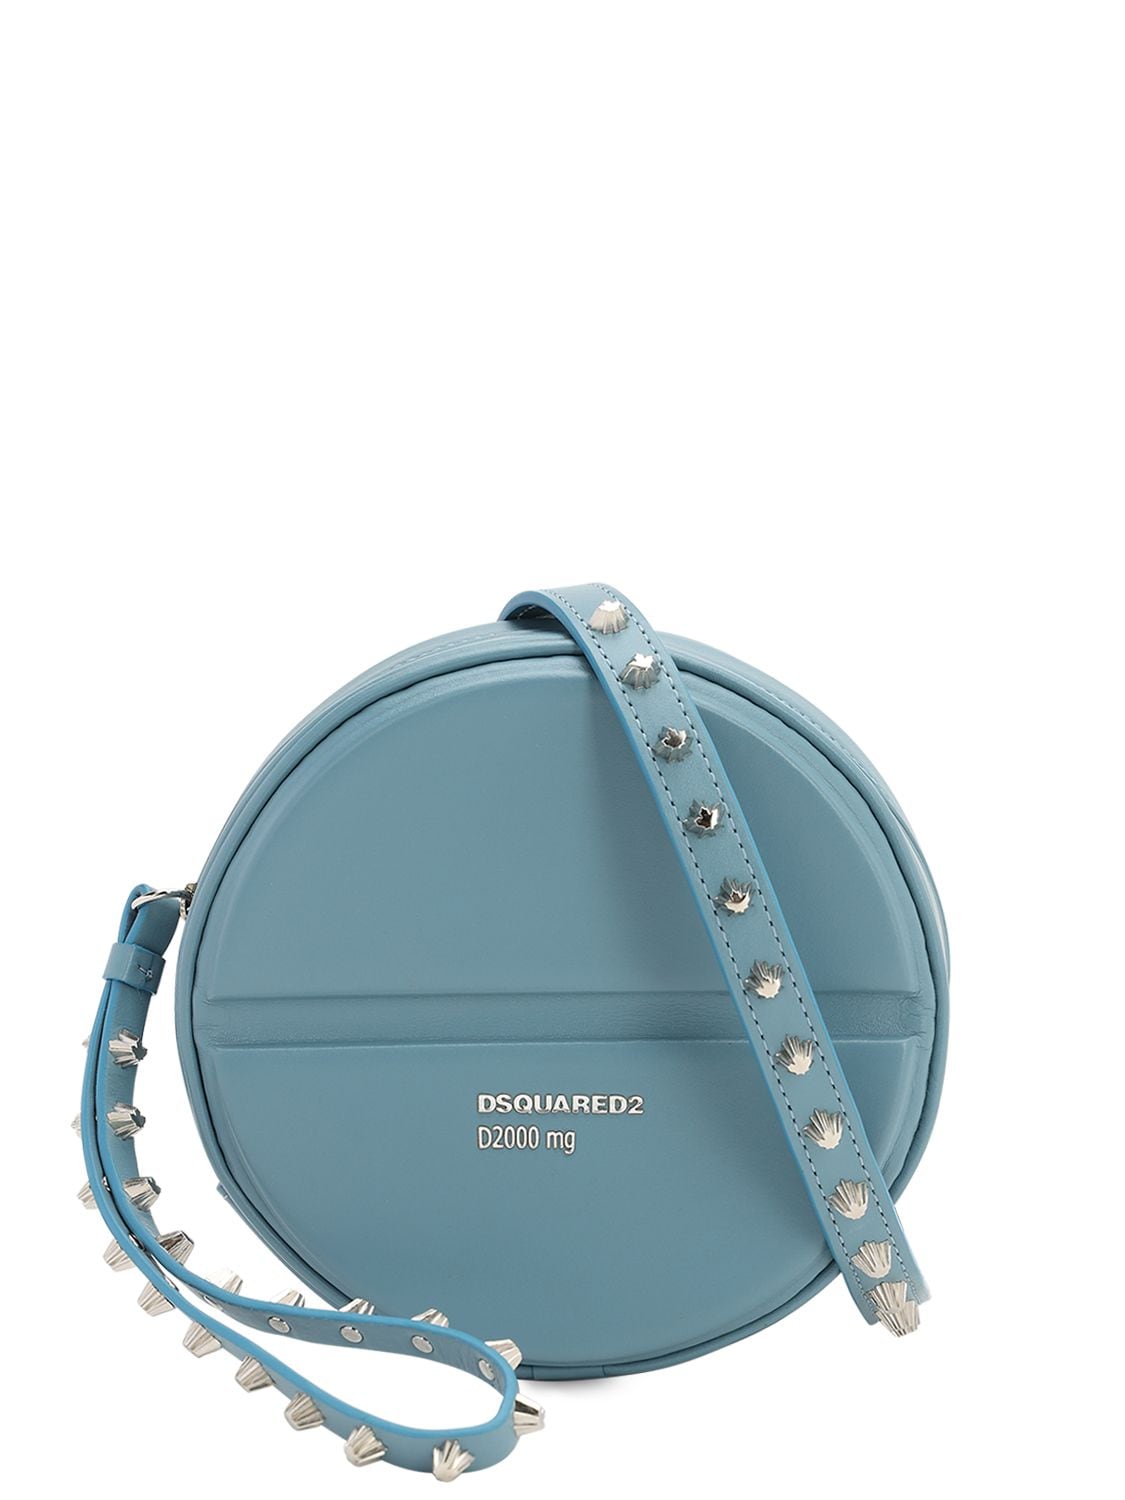 Dsquared2 Pills Round Leather Bag In Blue